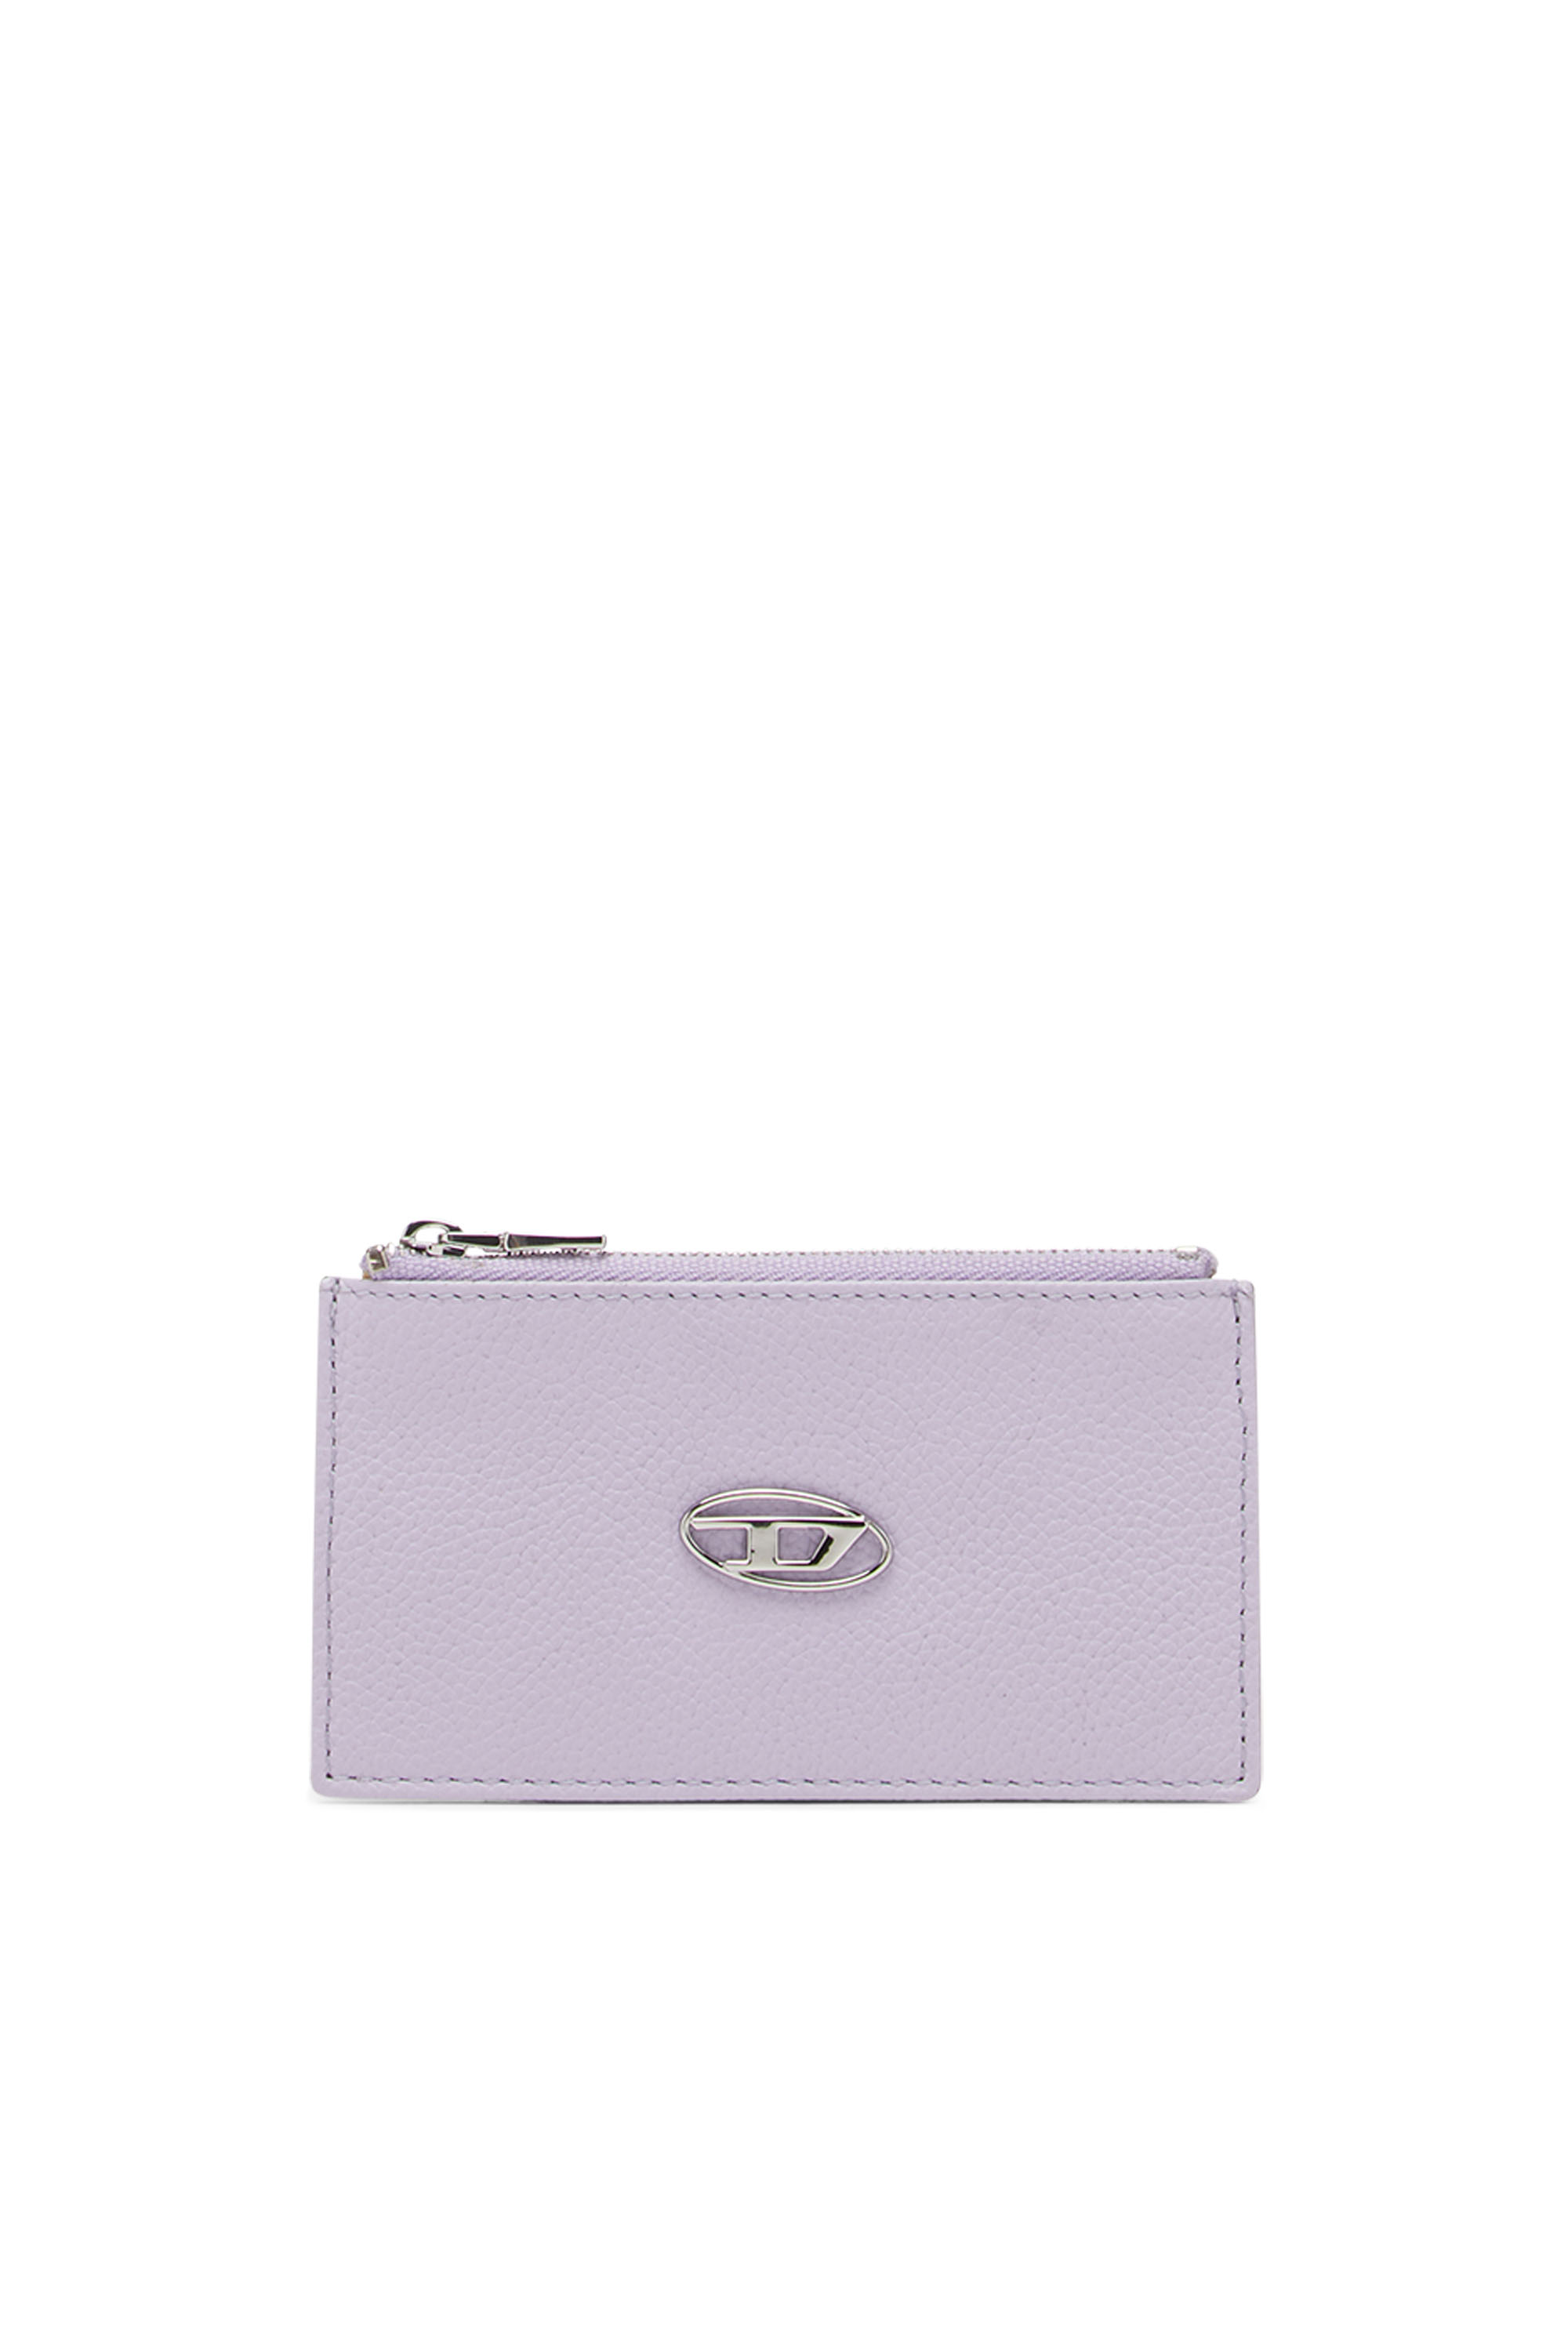 Diesel - PAOULINA, Lilac - Image 1